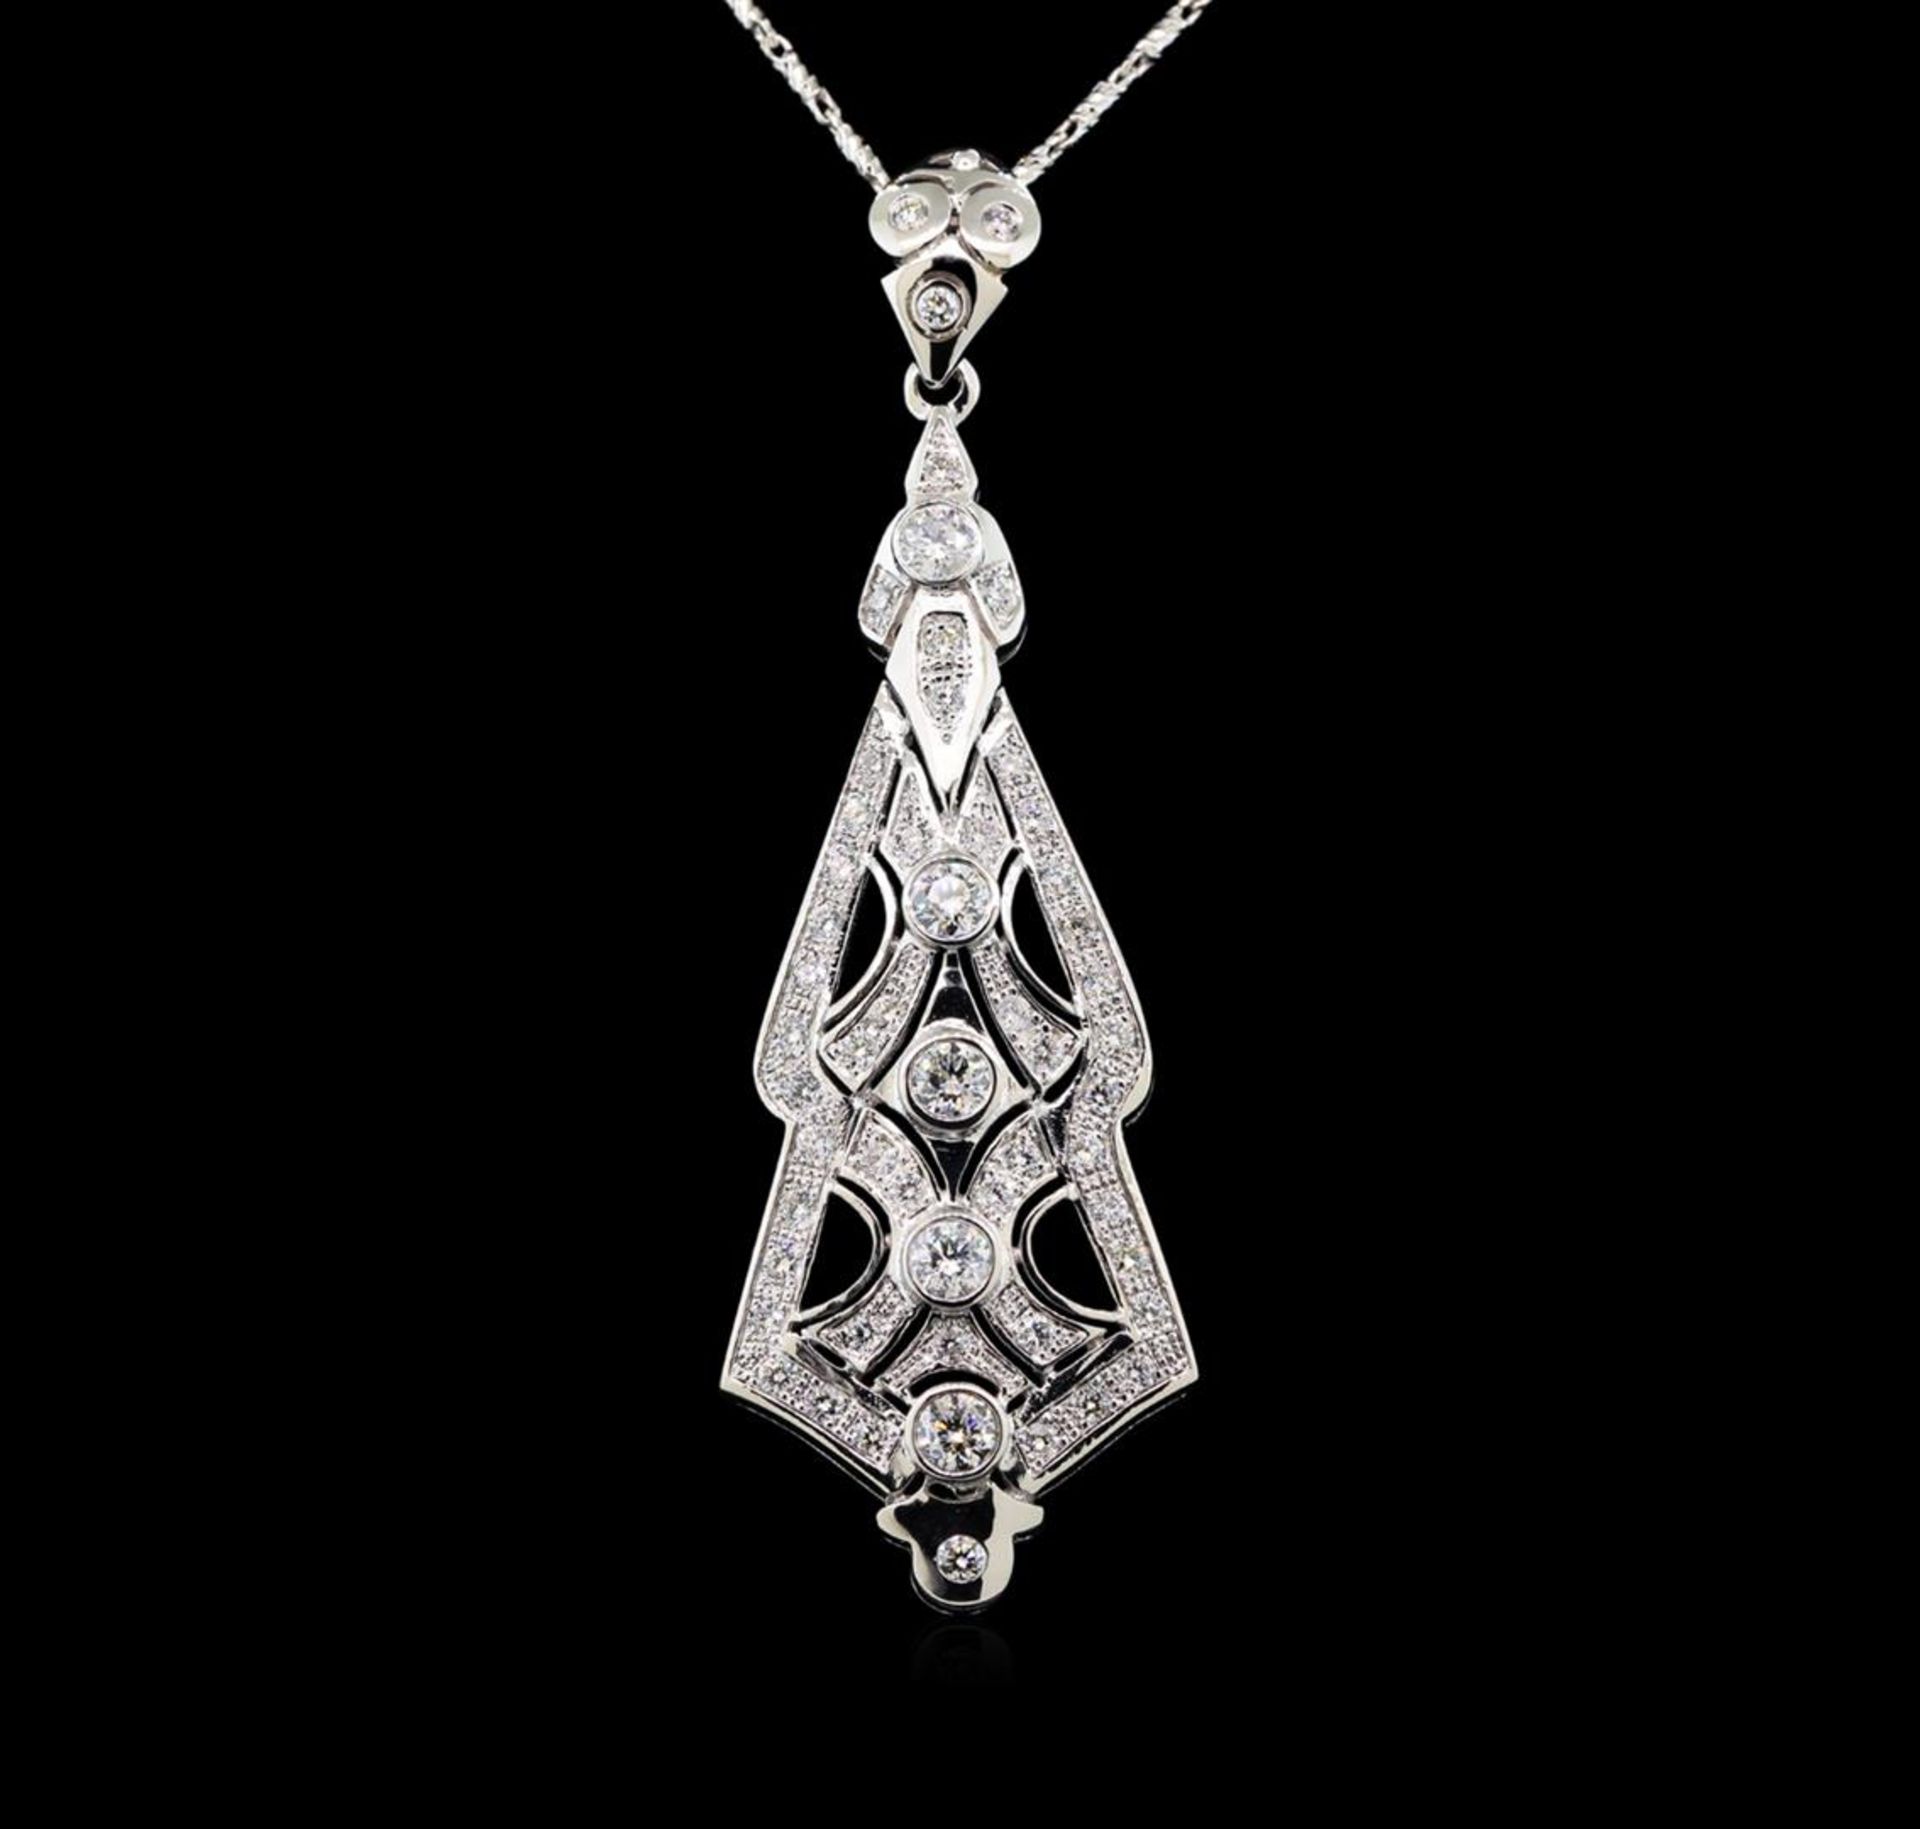 14KT White Gold 2.48ctw Diamond Pendant With Chain - Image 2 of 3